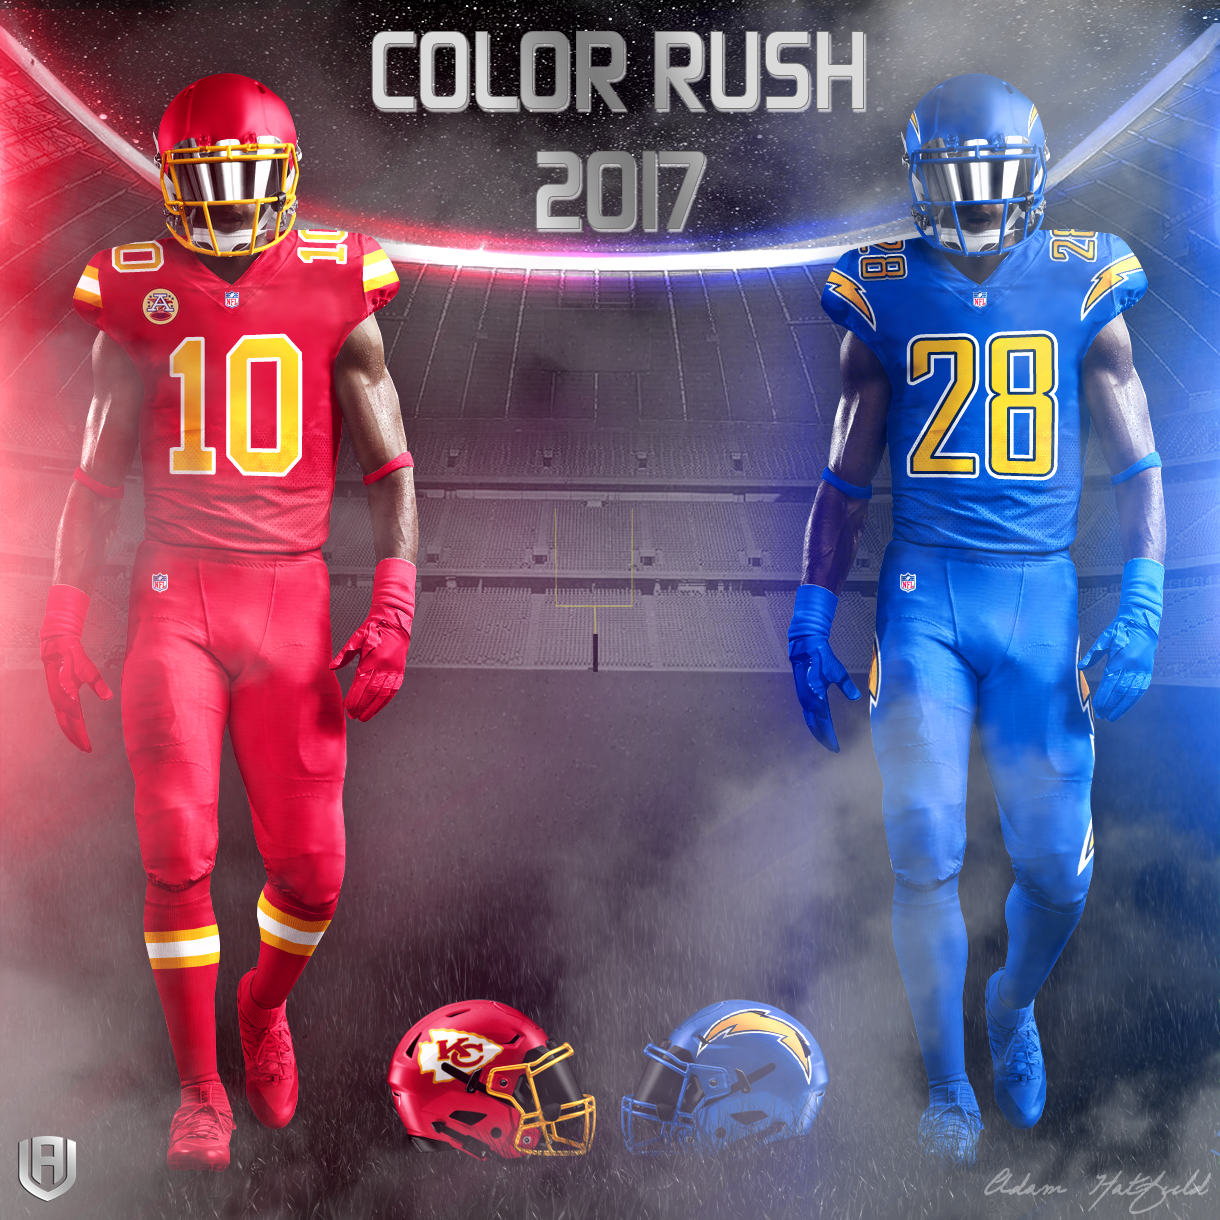 Design Adam S Take On Nfl Color Rush 2017 Touchdown Europe Coloring Wallpapers Download Free Images Wallpaper [coloring436.blogspot.com]